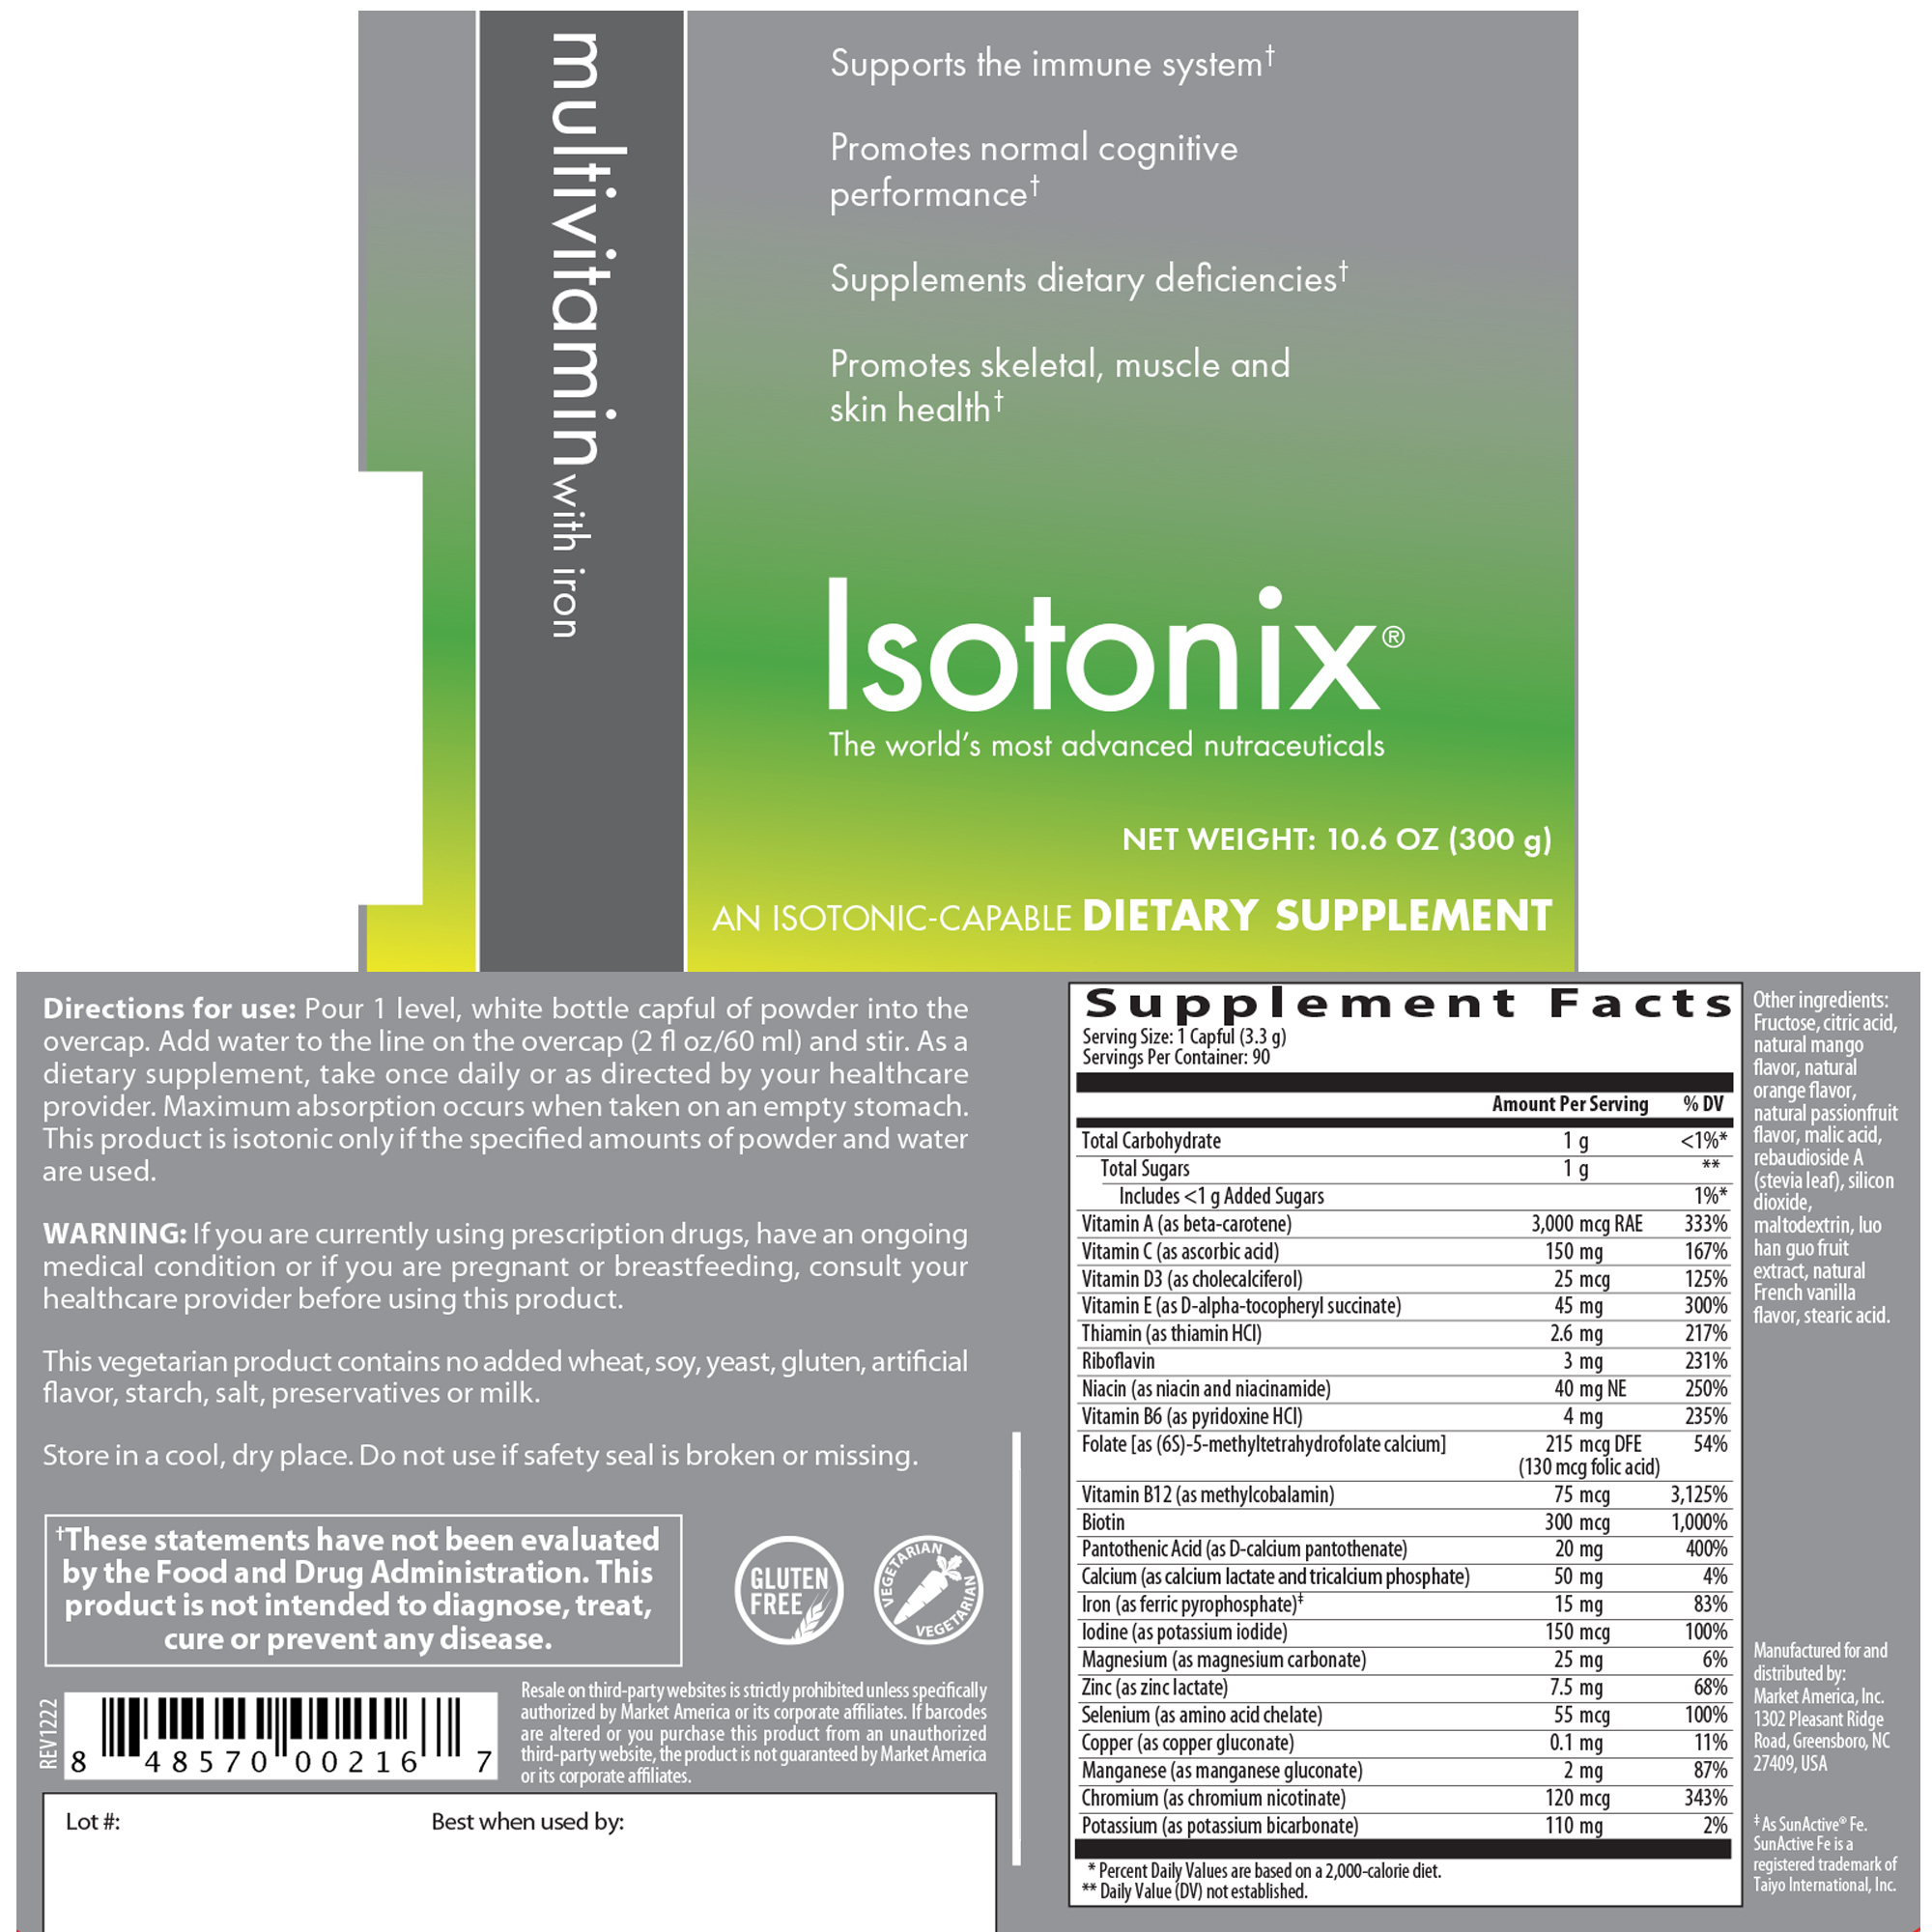 Isotonix® Daily Essentials Kit (With Iron)